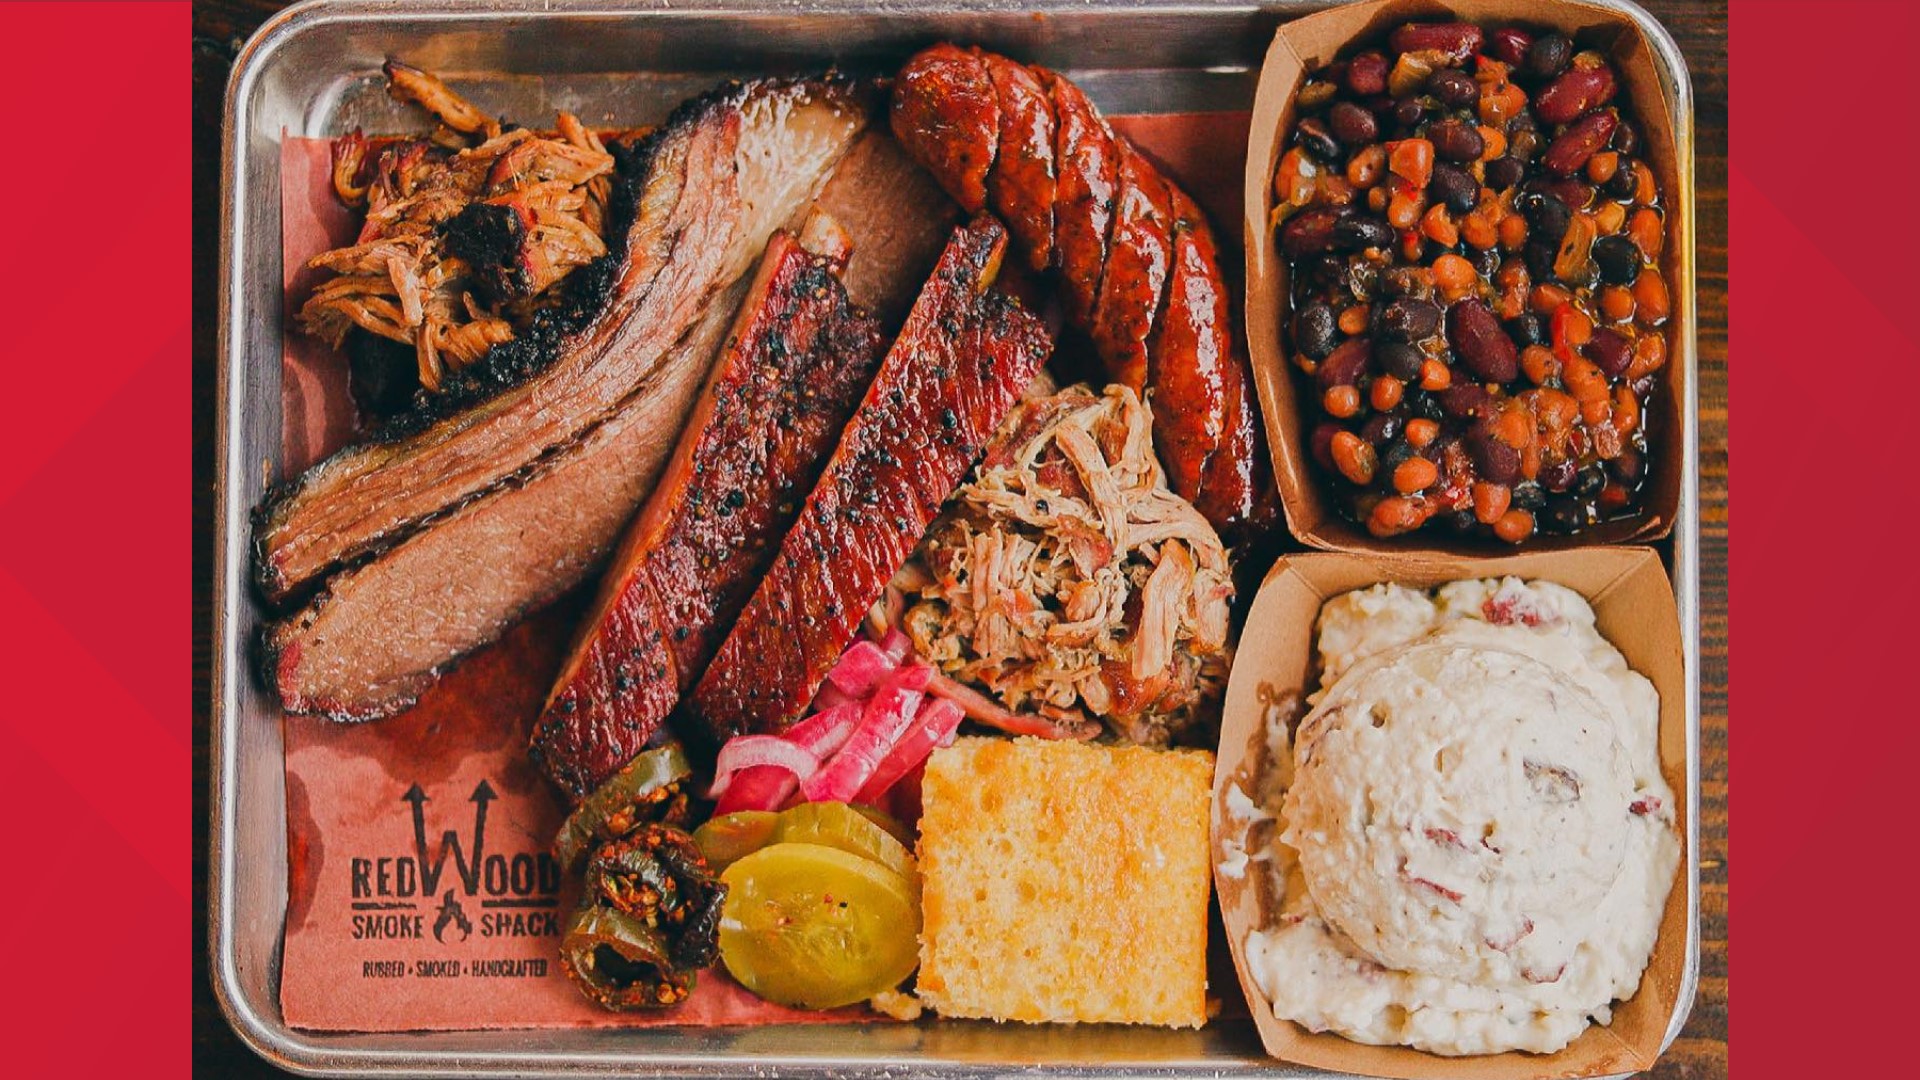 With years of success under its belt, Redwood Smoke Shack Texas Inspired BBQ is opening a second location, but the Norfolk spot wasn't even the first.